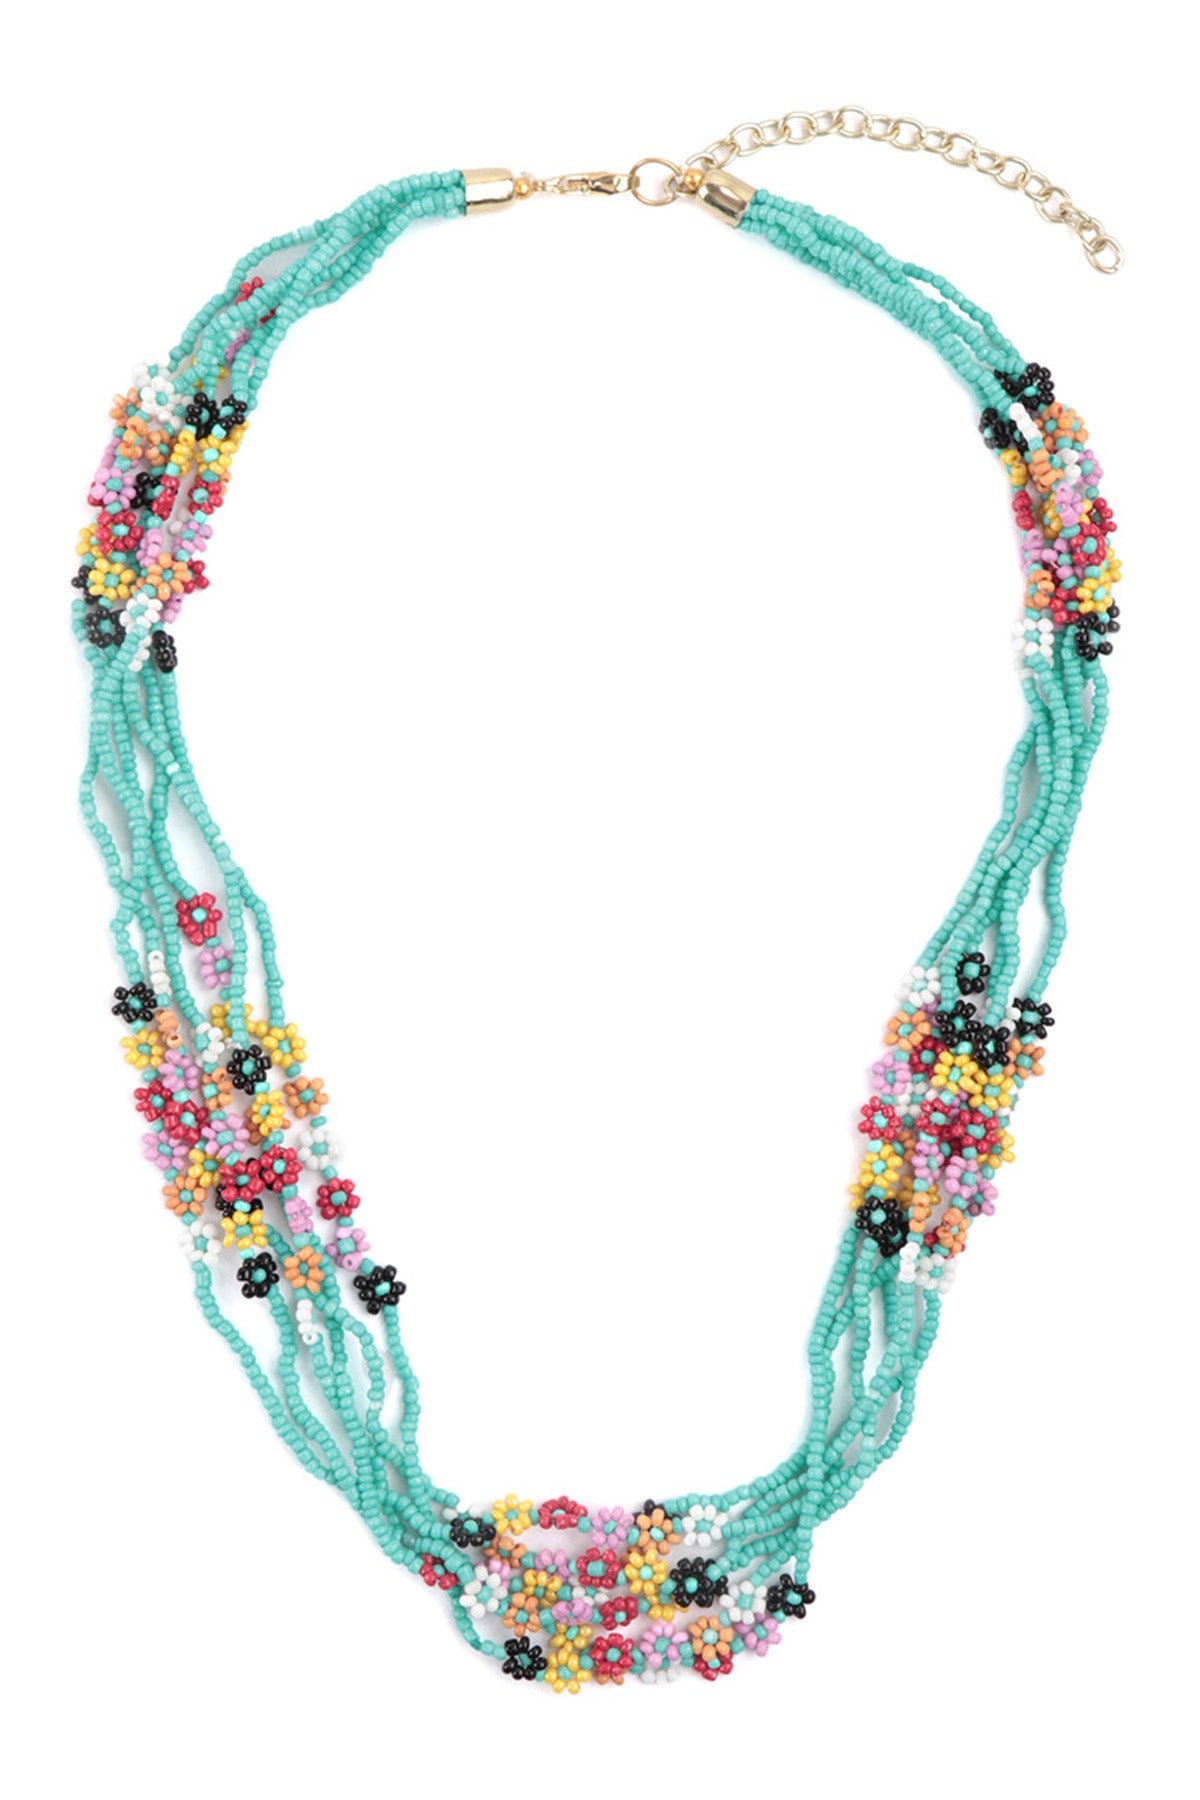 SEED BEADS MULTI LAYERED FLOWER STATIONARY NECKLACE